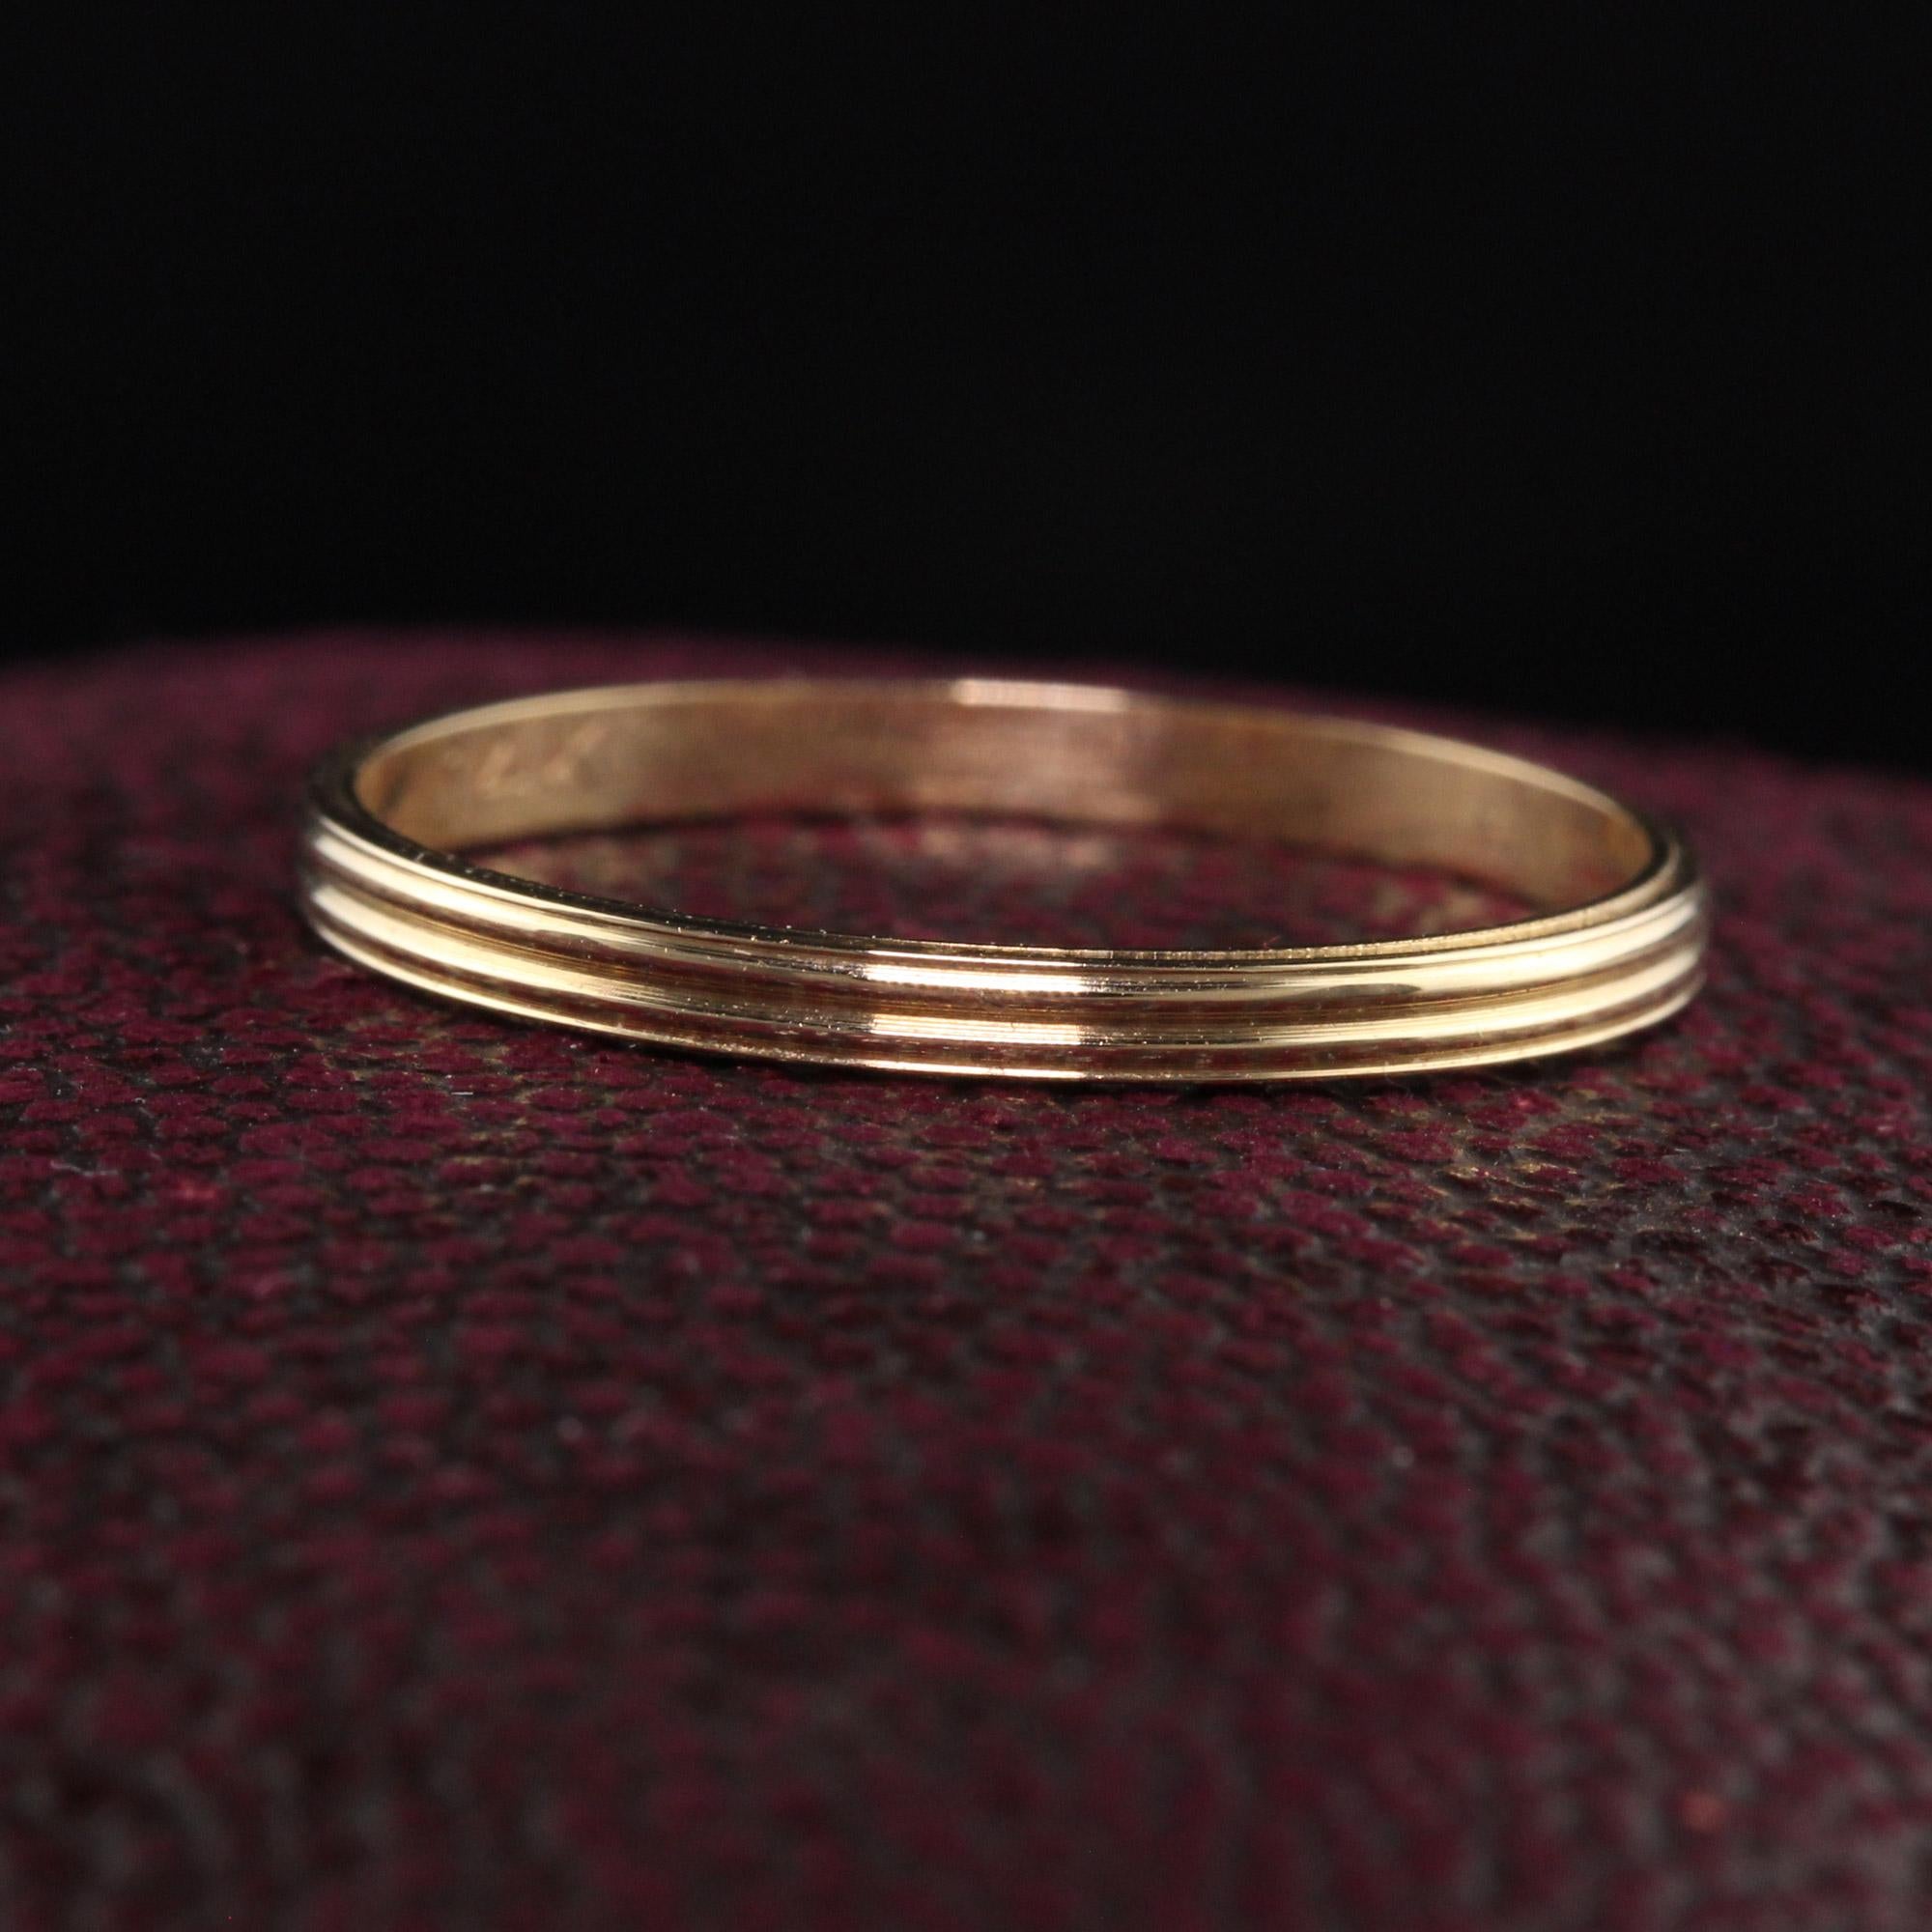 Beautiful Antique Art Deco 14K Yellow Gold Classic Grooved Wedding Band. This classic wedding band is grooved on the top and is in amazing condition. It can be stacked with other gold bands as well.

Item #R1009

Metal: 14K Yellow Gold

Weight: 1.1